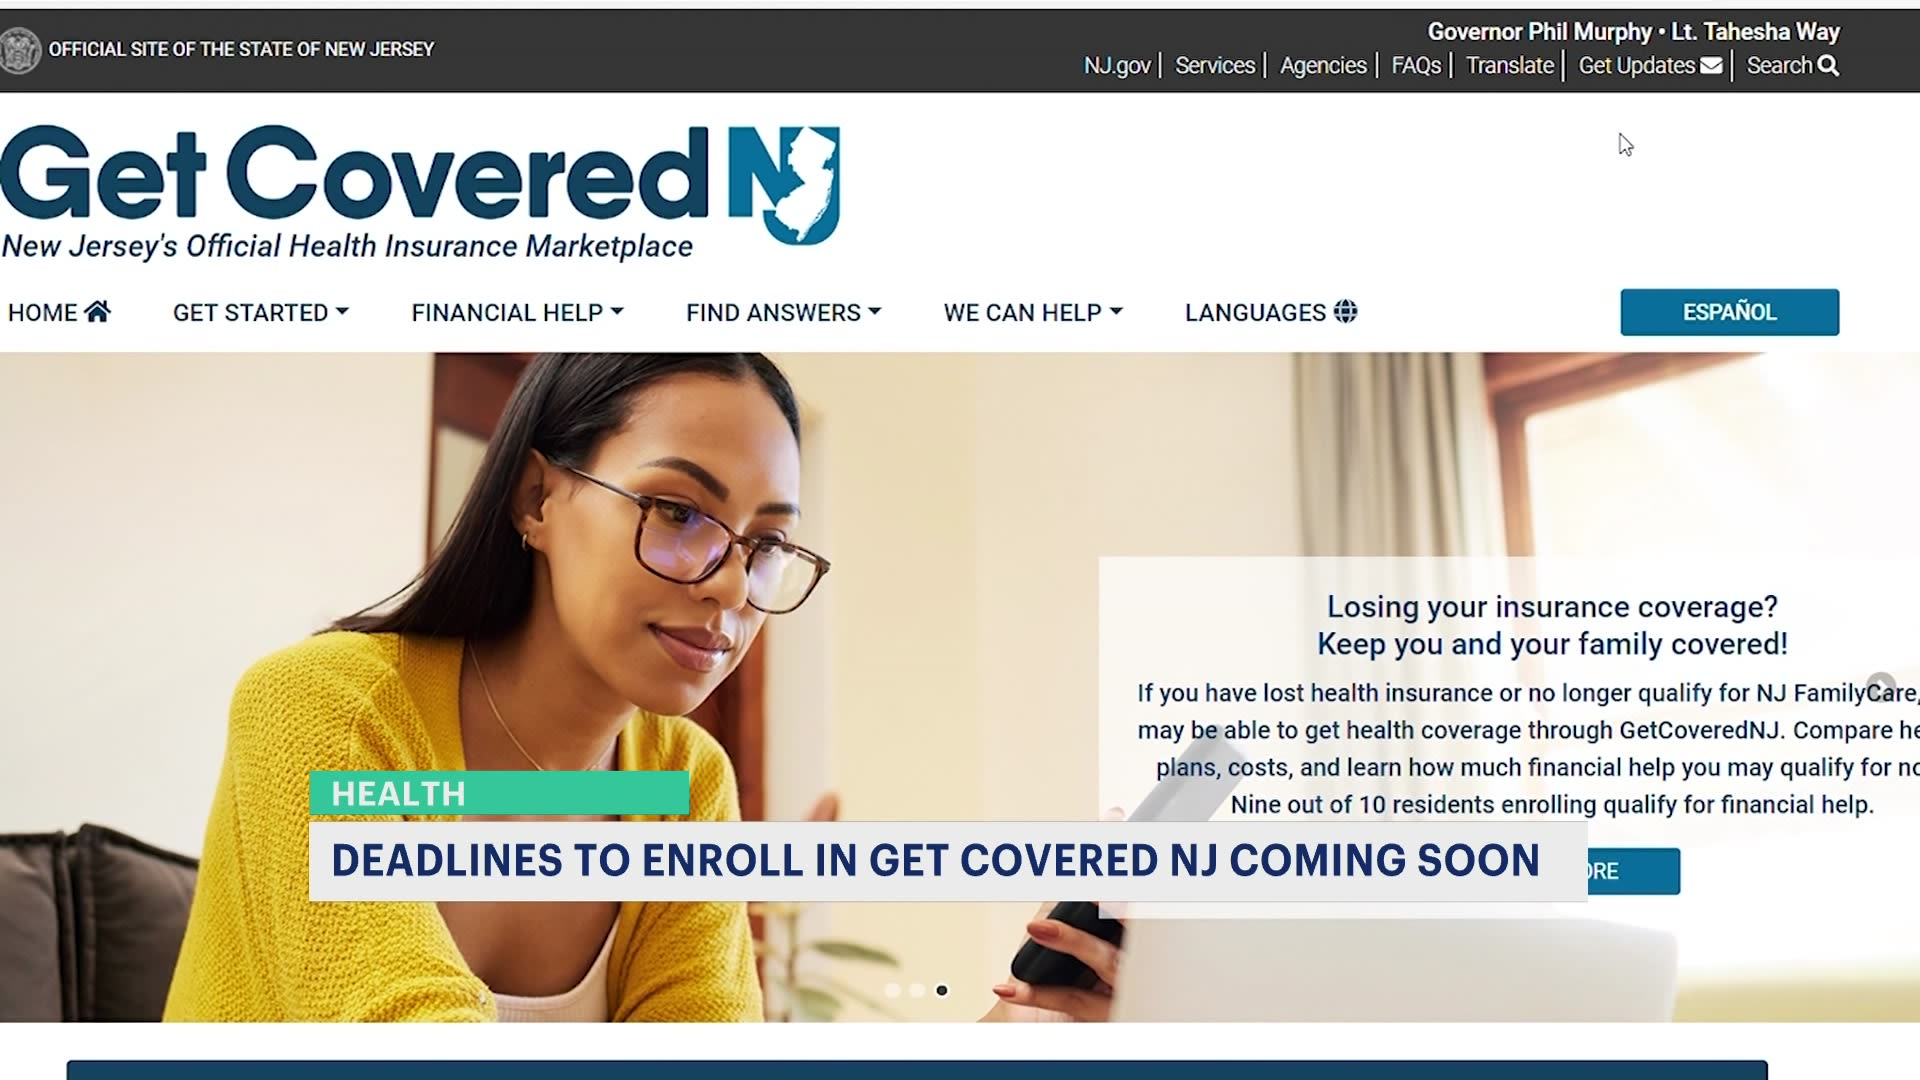 Health officials tout Get Covered NJ to help residents get health insurance  coverage